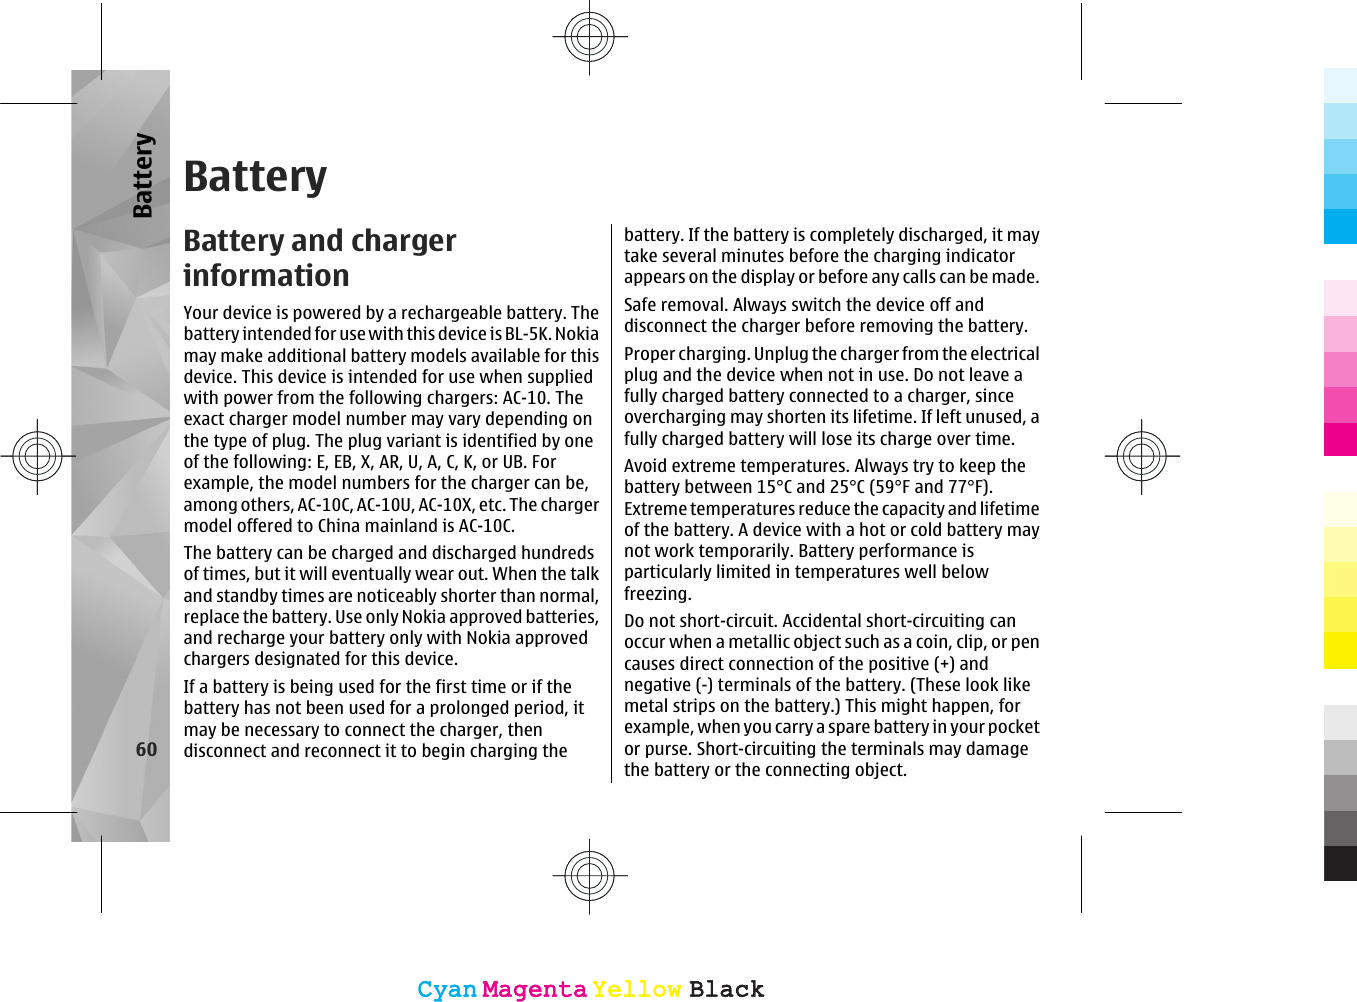 BatteryBattery and chargerinformationYour device is powered by a rechargeable battery. Thebattery intended for use with this device is BL-5K. Nokiamay make additional battery models available for thisdevice. This device is intended for use when suppliedwith power from the following chargers: AC-10. Theexact charger model number may vary depending onthe type of plug. The plug variant is identified by oneof the following: E, EB, X, AR, U, A, C, K, or UB. Forexample, the model numbers for the charger can be,among others, AC-10C, AC-10U, AC-10X, etc. The chargermodel offered to China mainland is AC-10C.The battery can be charged and discharged hundredsof times, but it will eventually wear out. When the talkand standby times are noticeably shorter than normal,replace the battery. Use only Nokia approved batteries,and recharge your battery only with Nokia approvedchargers designated for this device.If a battery is being used for the first time or if thebattery has not been used for a prolonged period, itmay be necessary to connect the charger, thendisconnect and reconnect it to begin charging thebattery. If the battery is completely discharged, it maytake several minutes before the charging indicatorappears on the display or before any calls can be made.Safe removal. Always switch the device off anddisconnect the charger before removing the battery.Proper charging. Unplug the charger from the electricalplug and the device when not in use. Do not leave afully charged battery connected to a charger, sinceovercharging may shorten its lifetime. If left unused, afully charged battery will lose its charge over time.Avoid extreme temperatures. Always try to keep thebattery between 15°C and 25°C (59°F and 77°F).Extreme temperatures reduce the capacity and lifetimeof the battery. A device with a hot or cold battery maynot work temporarily. Battery performance isparticularly limited in temperatures well belowfreezing.Do not short-circuit. Accidental short-circuiting canoccur when a metallic object such as a coin, clip, or pencauses direct connection of the positive (+) andnegative (-) terminals of the battery. (These look likemetal strips on the battery.) This might happen, forexample, when you carry a spare battery in your pocketor purse. Short-circuiting the terminals may damagethe battery or the connecting object.60BatteryCyanCyanMagentaMagentaYellowYellowBlackBlackCyanCyanMagentaMagentaYellowYellowBlackBlack